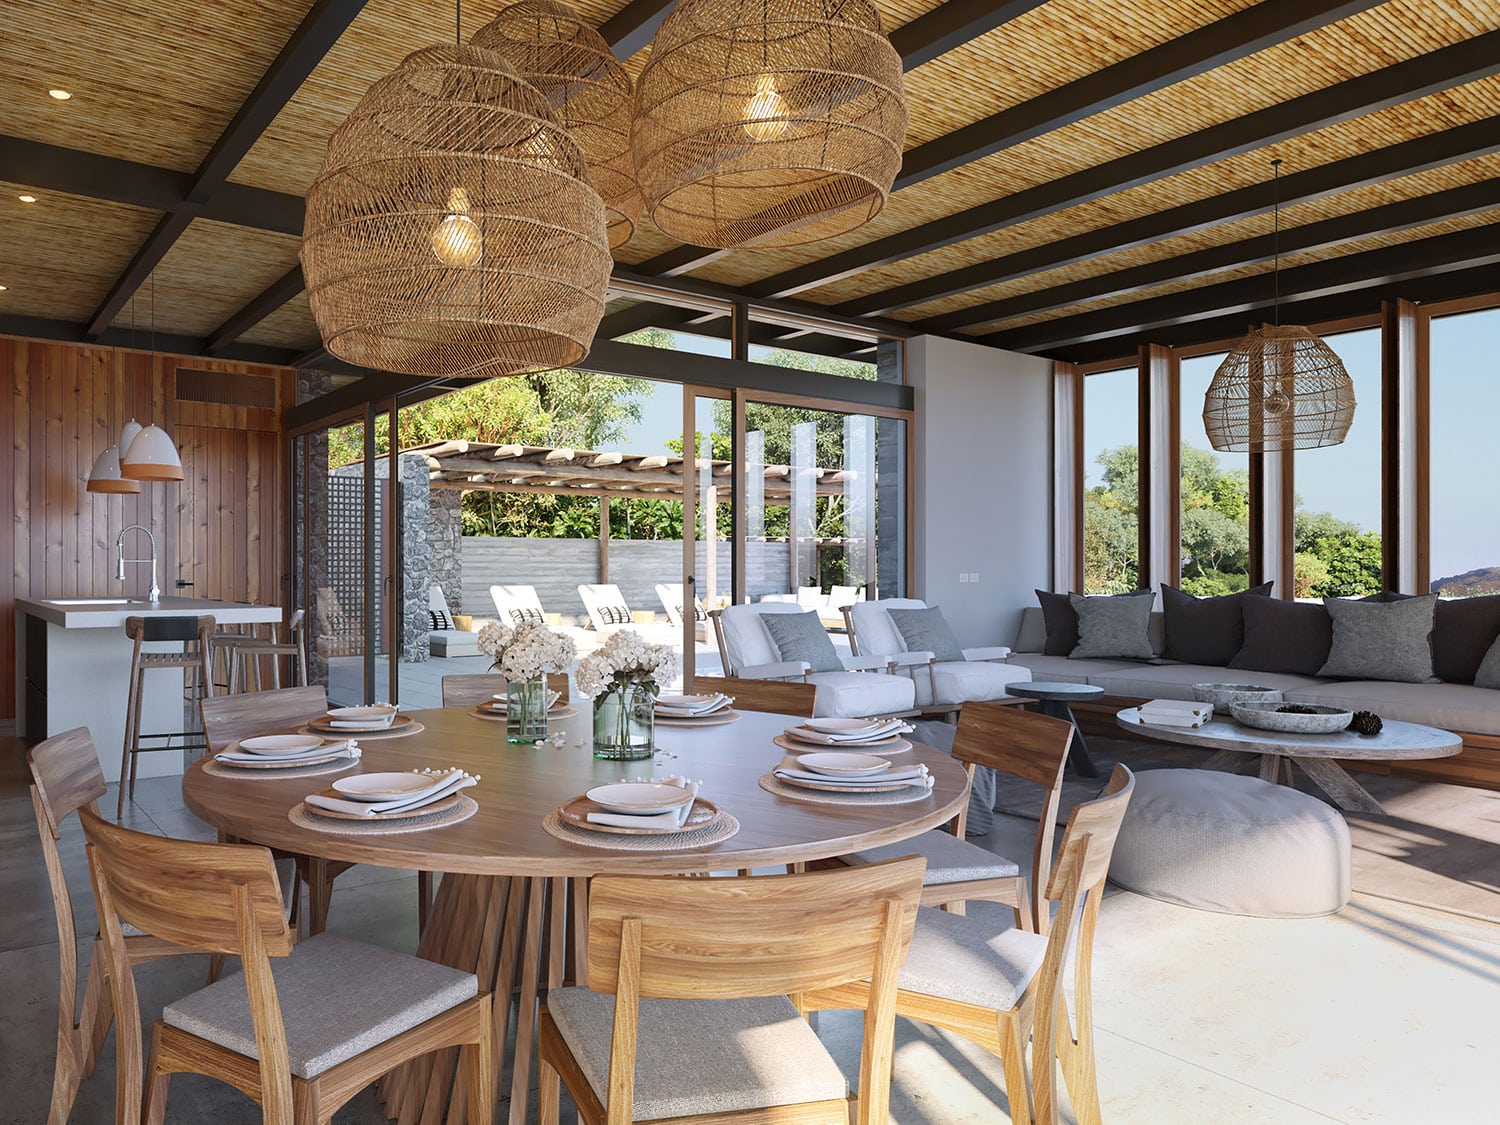 The dining space of a Sunset Villa in the private community of Costa Elena in Costa Rica.